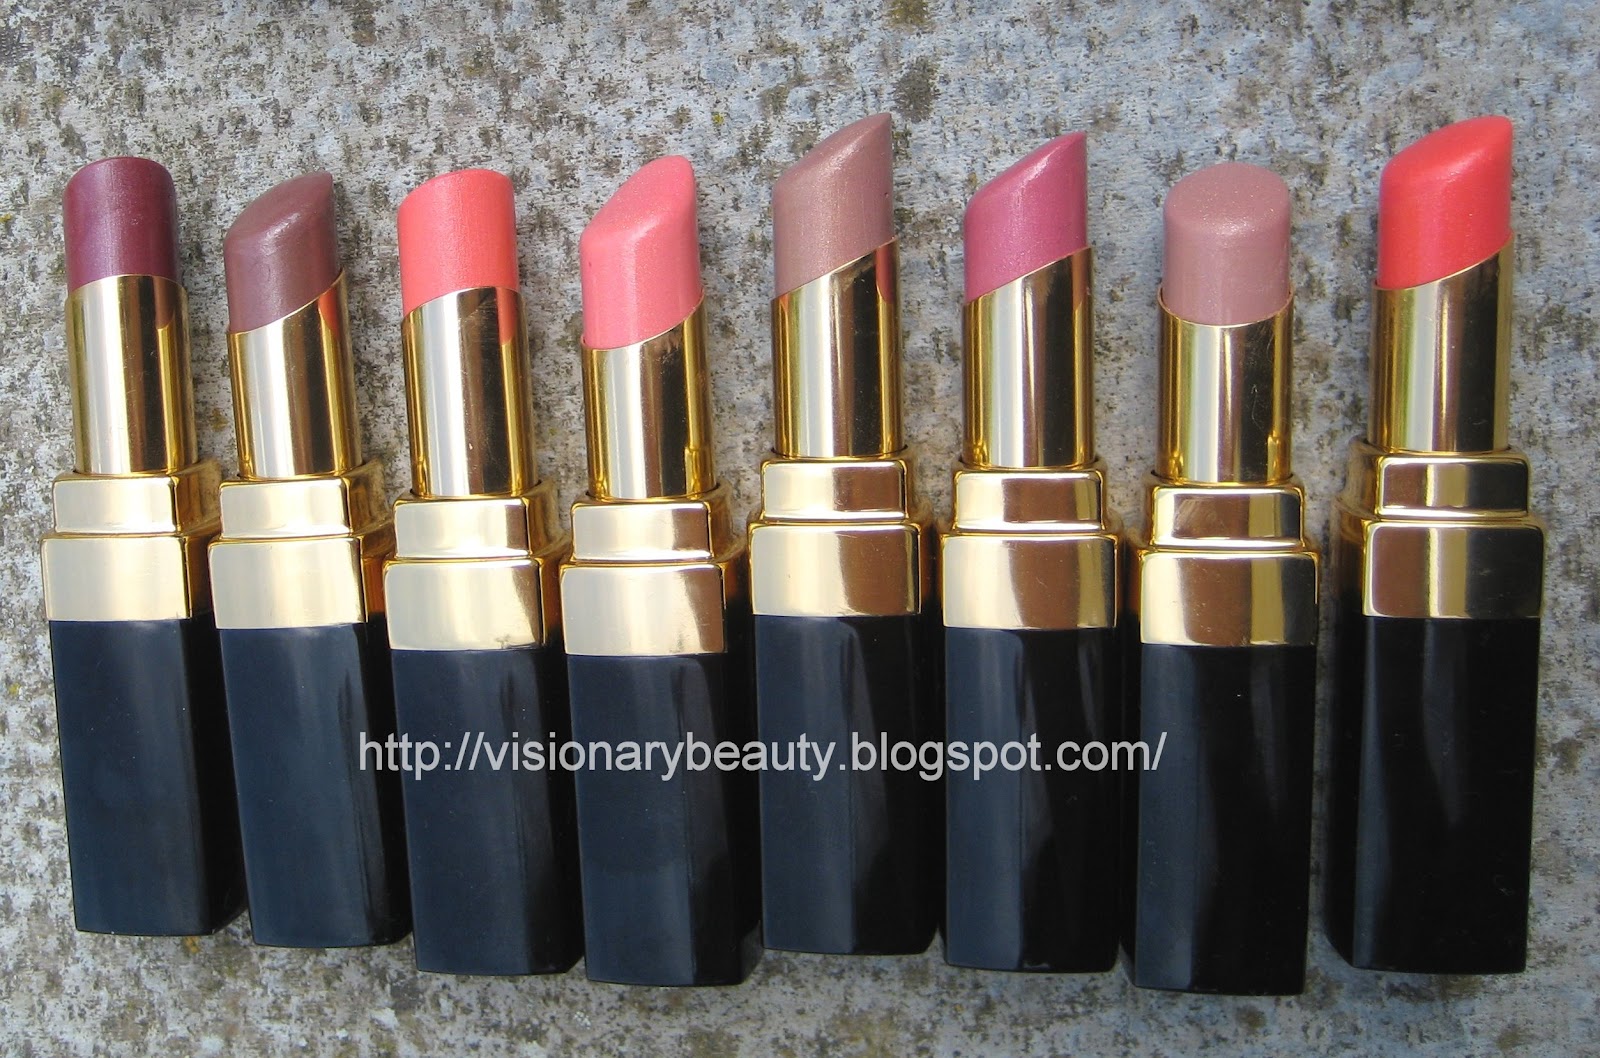 Chanel Rouge Coco Shine Lipstick in Boy Review